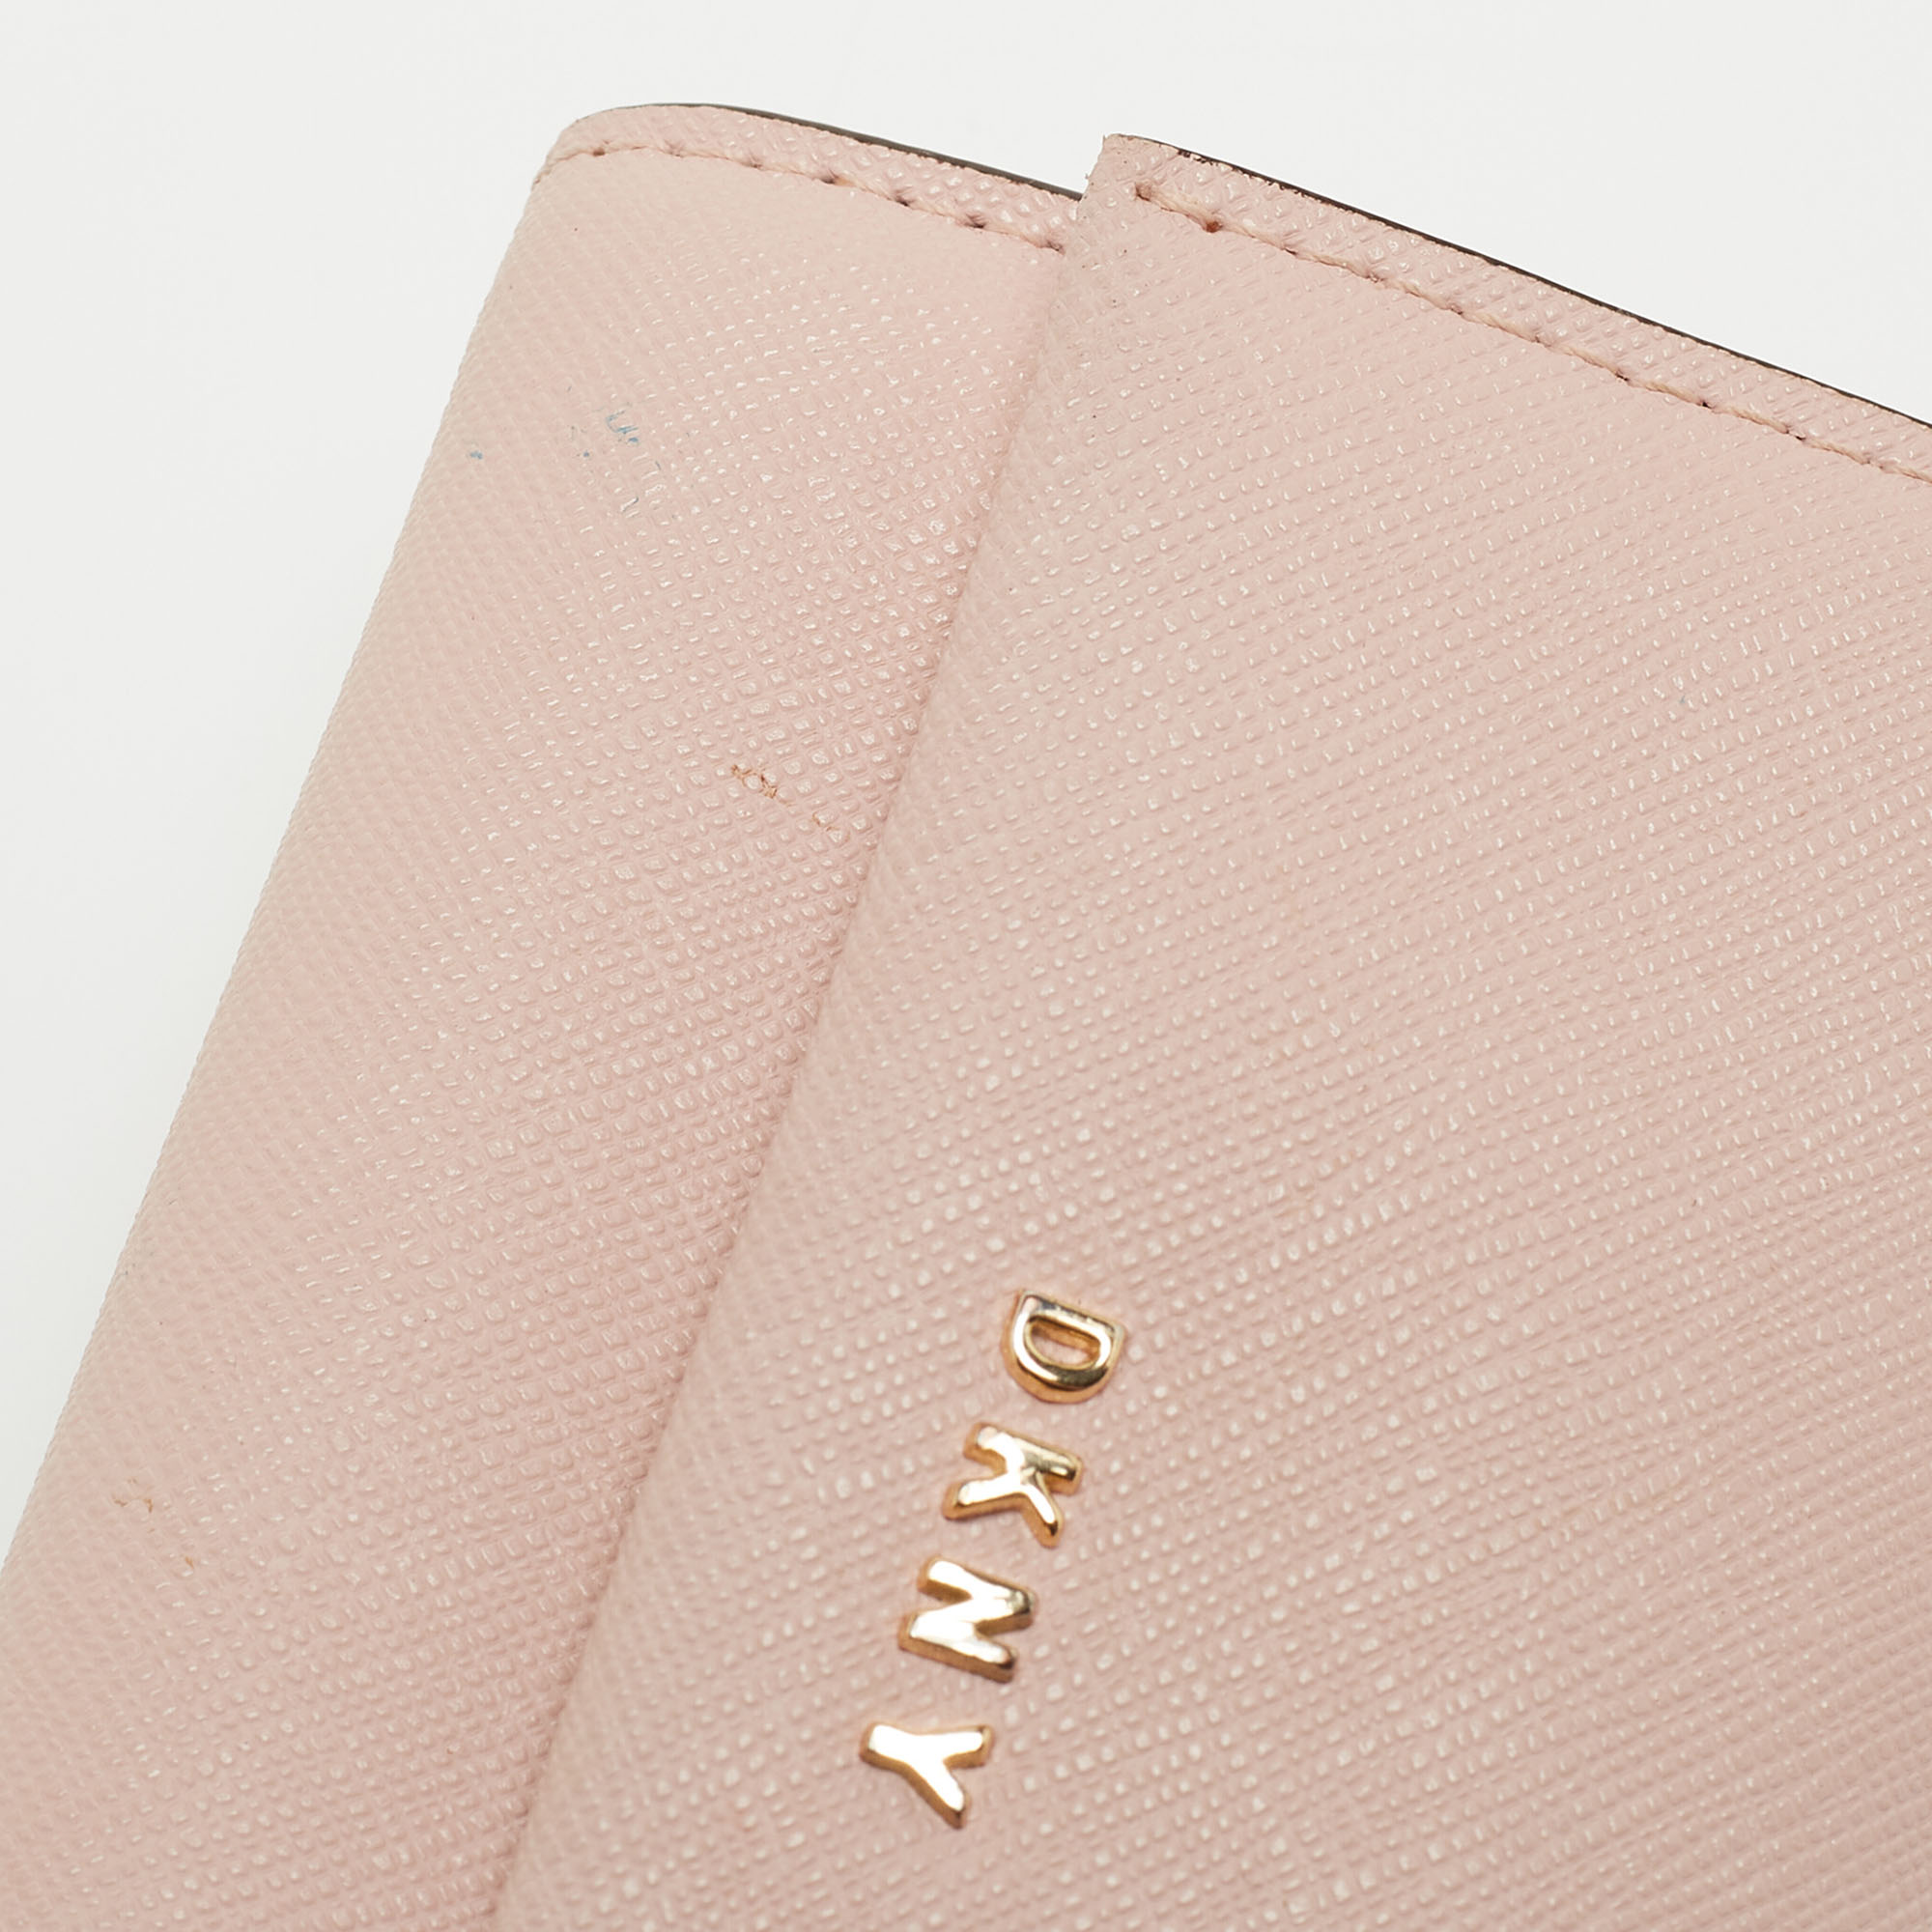 DKNY Pink Saffiano Leather Flap Compact Wallet